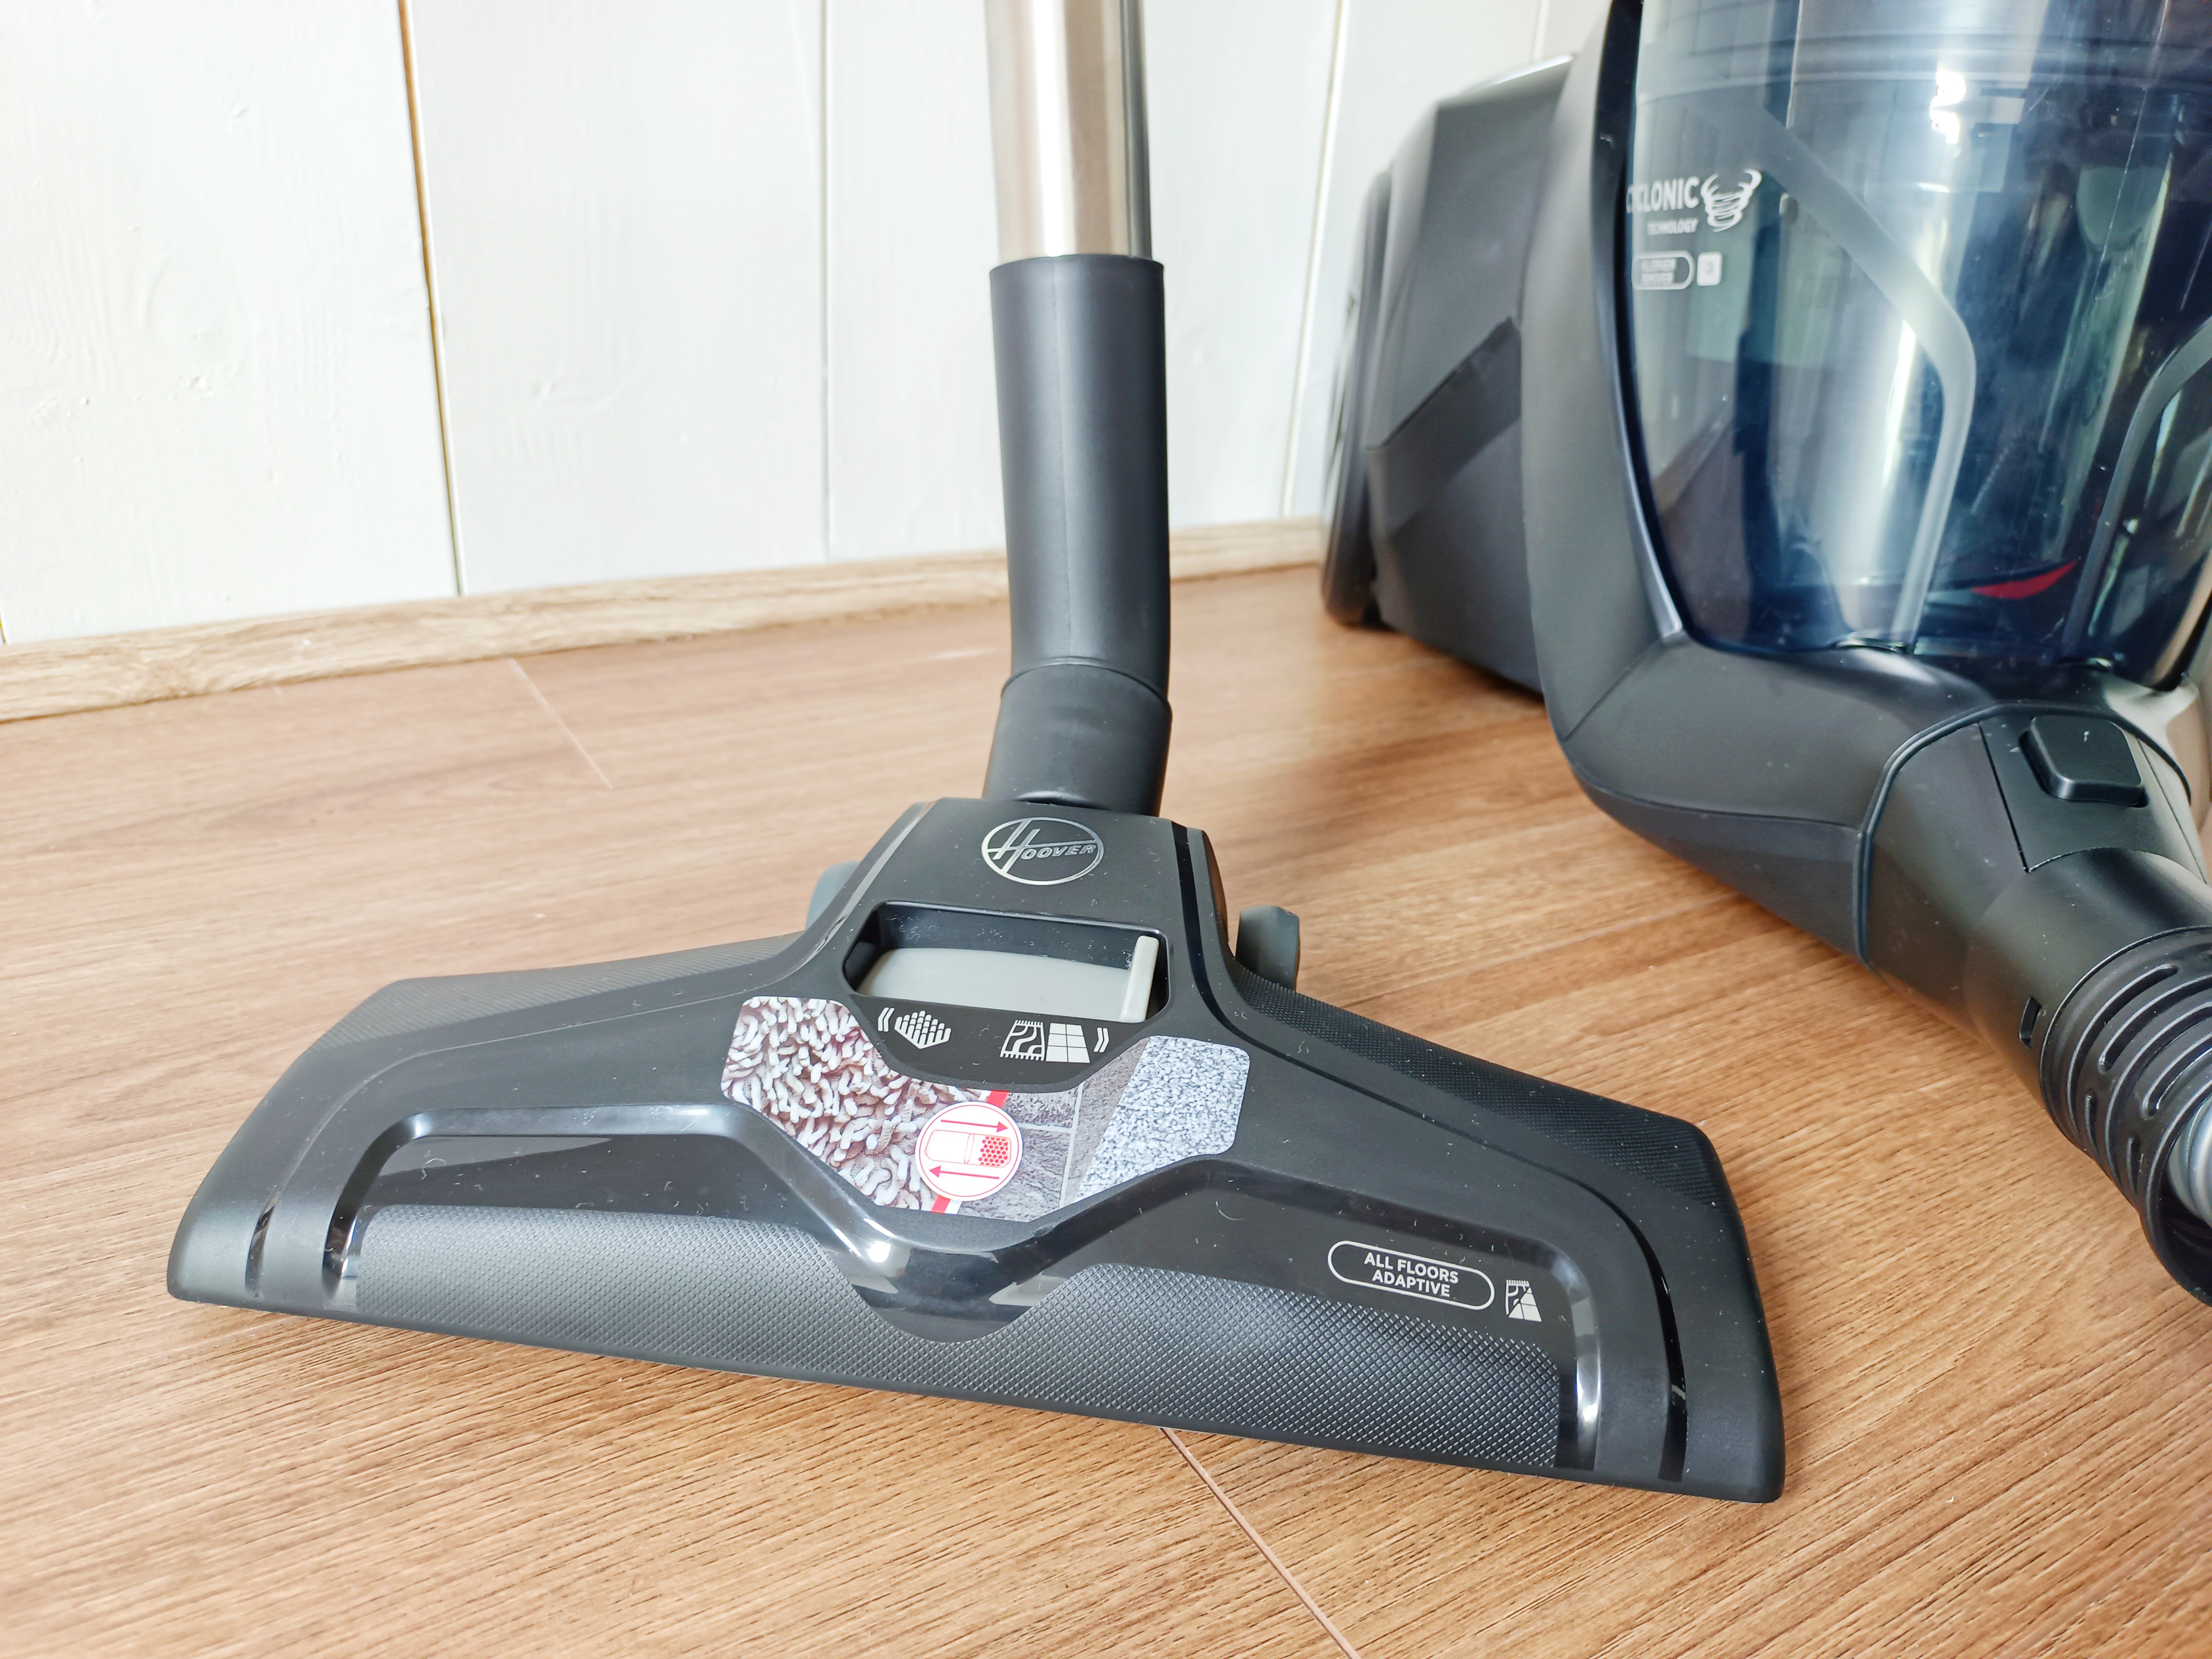 Hoover H-Power 300